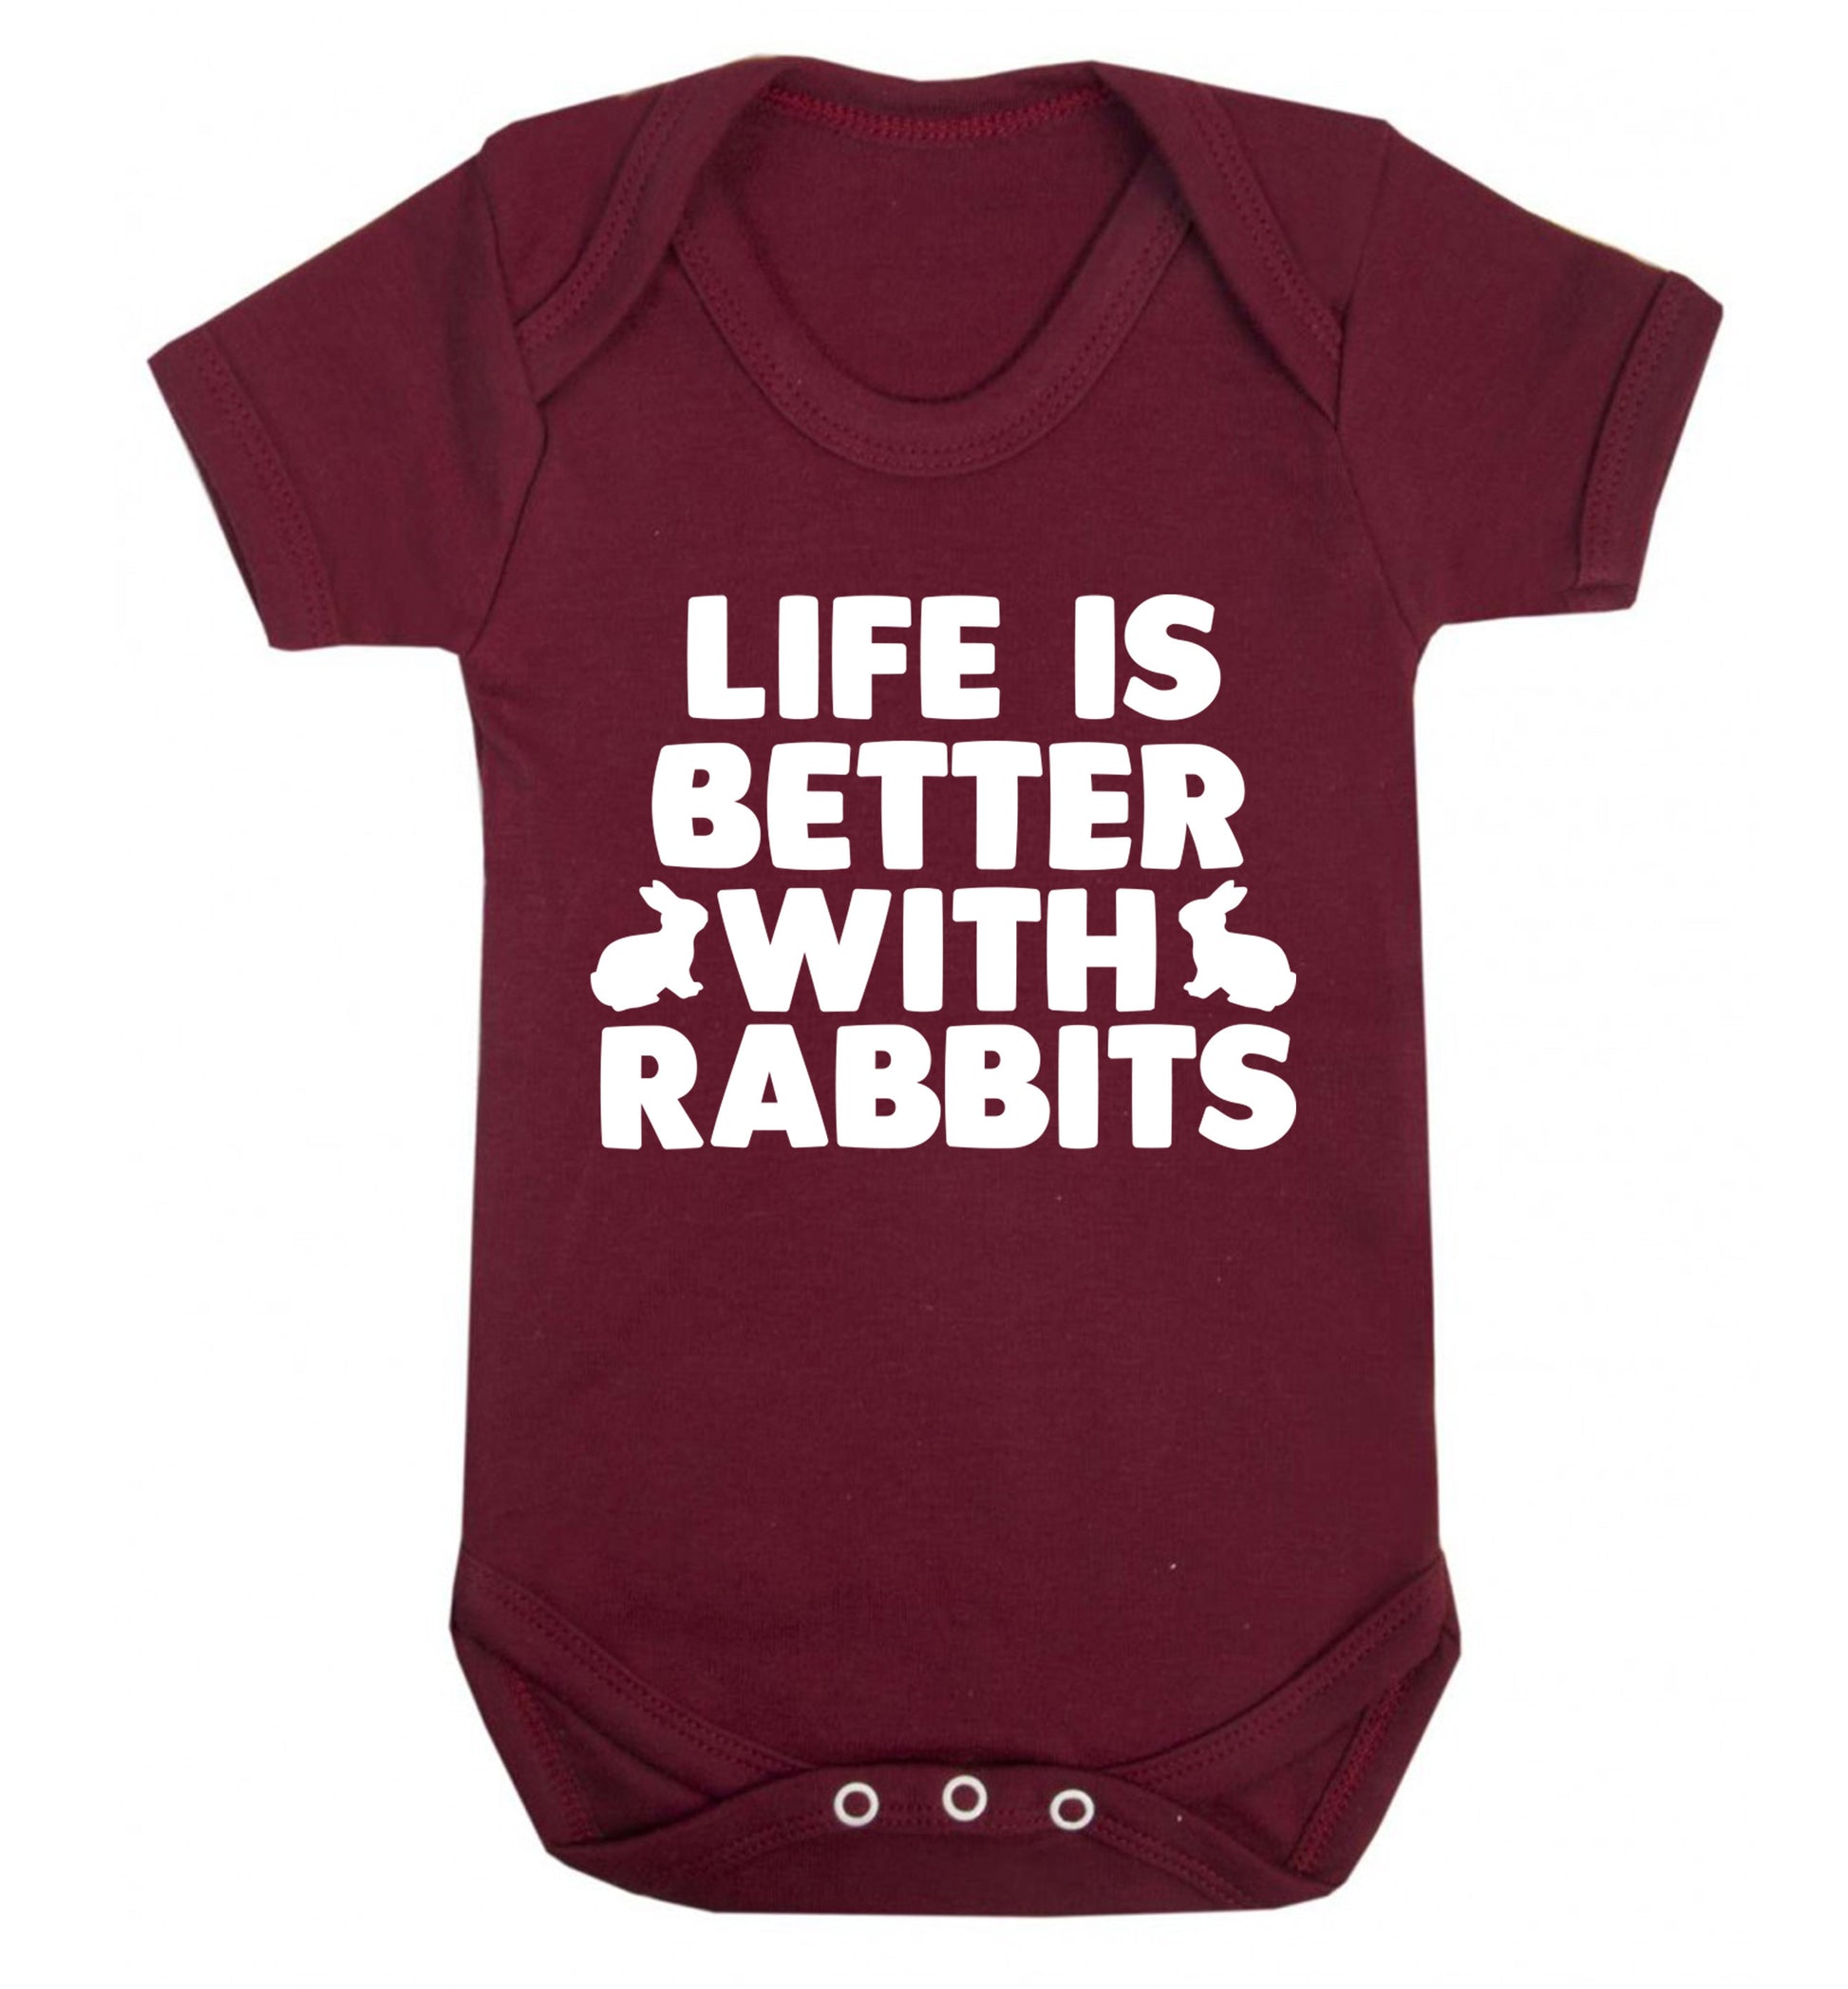 Life is better with rabbits Baby Vest maroon 18-24 months